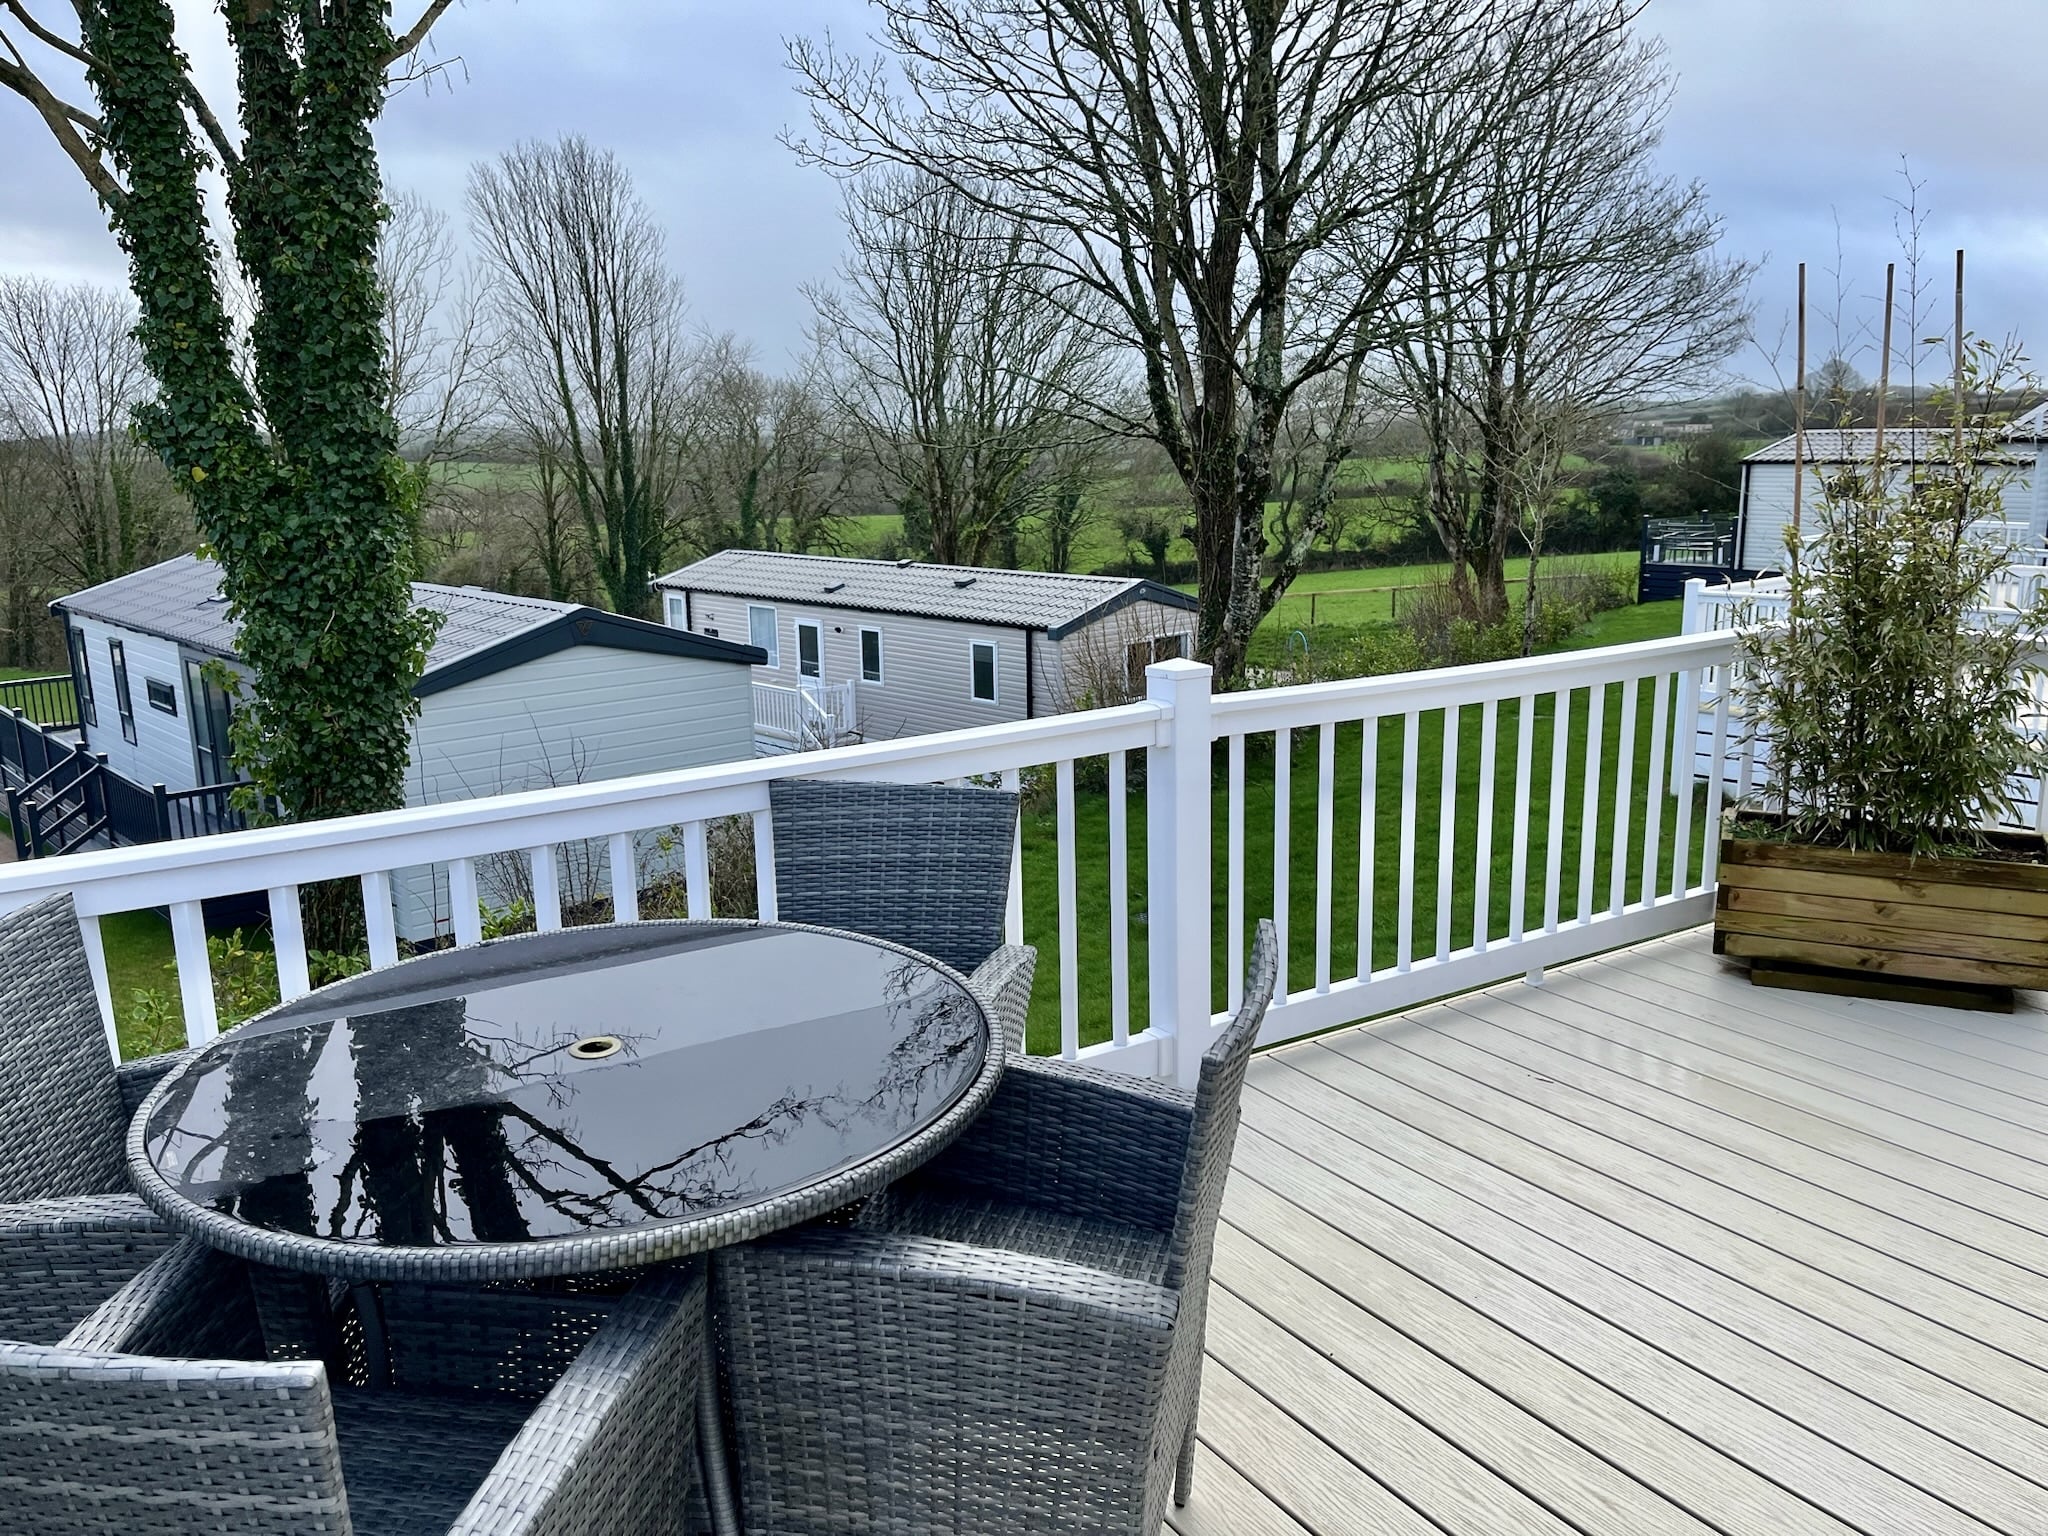 2022 Willerby Linwood for sale at Meadow Lakes Holiday Park